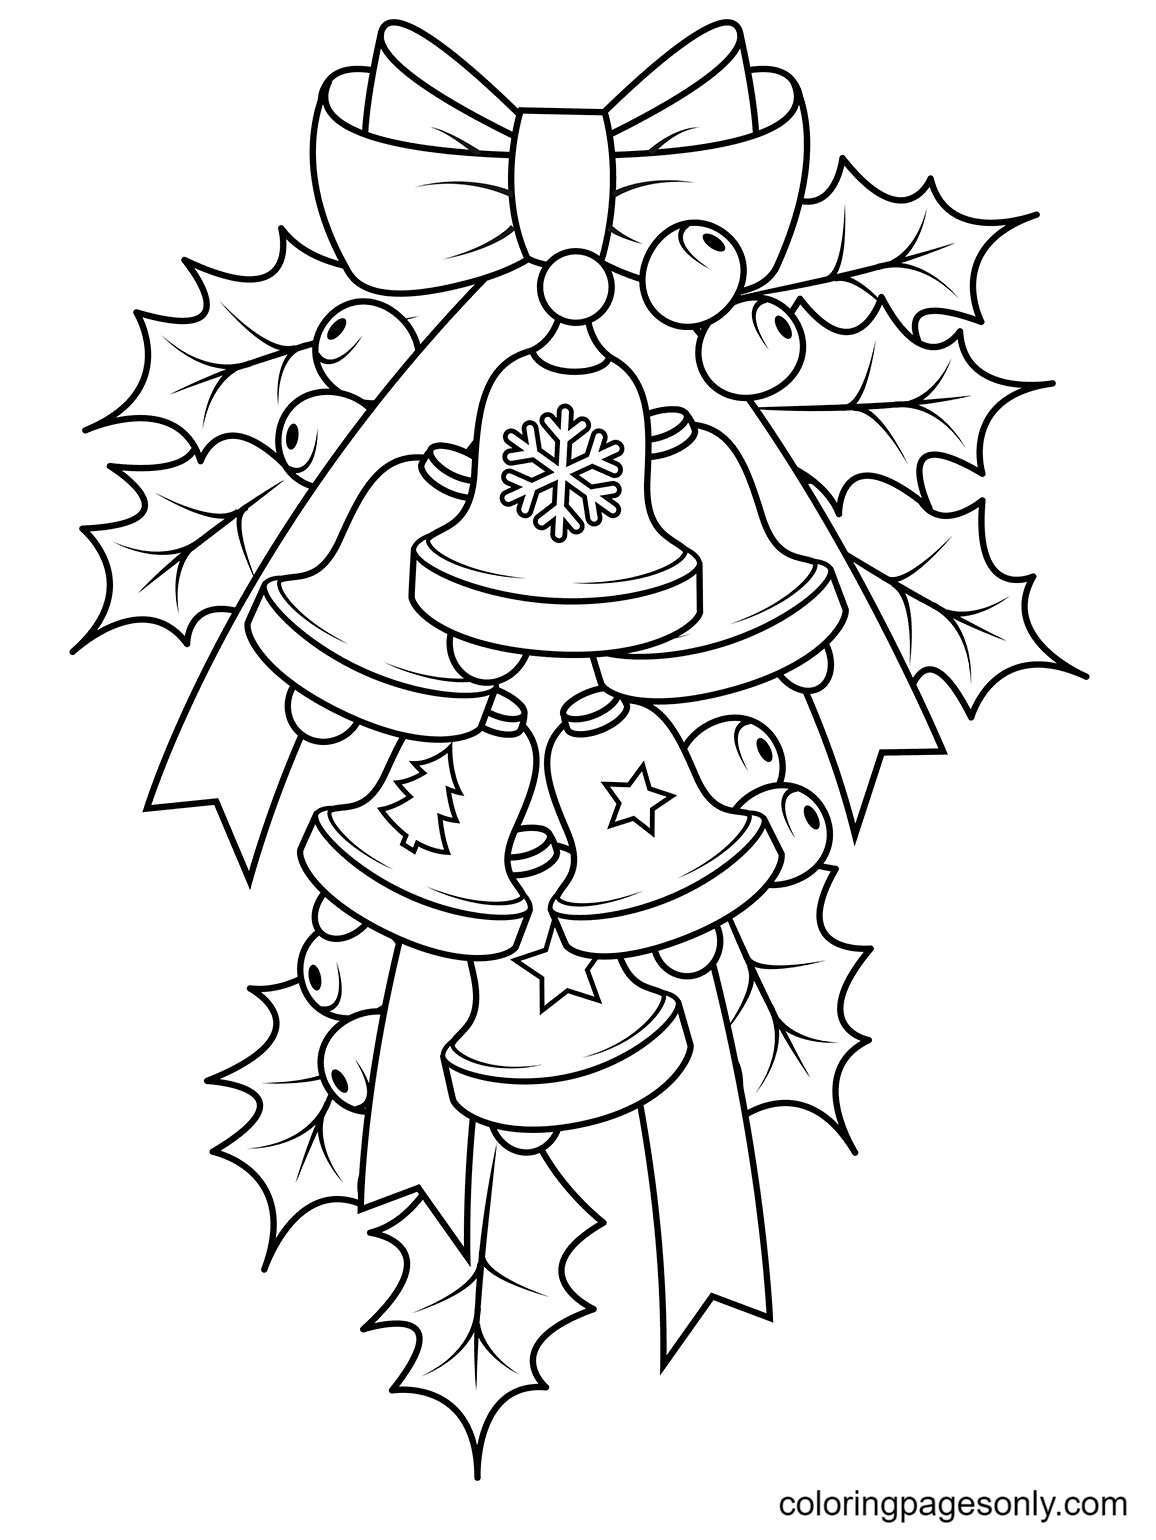 Christmas Bells and Holly Coloring Page